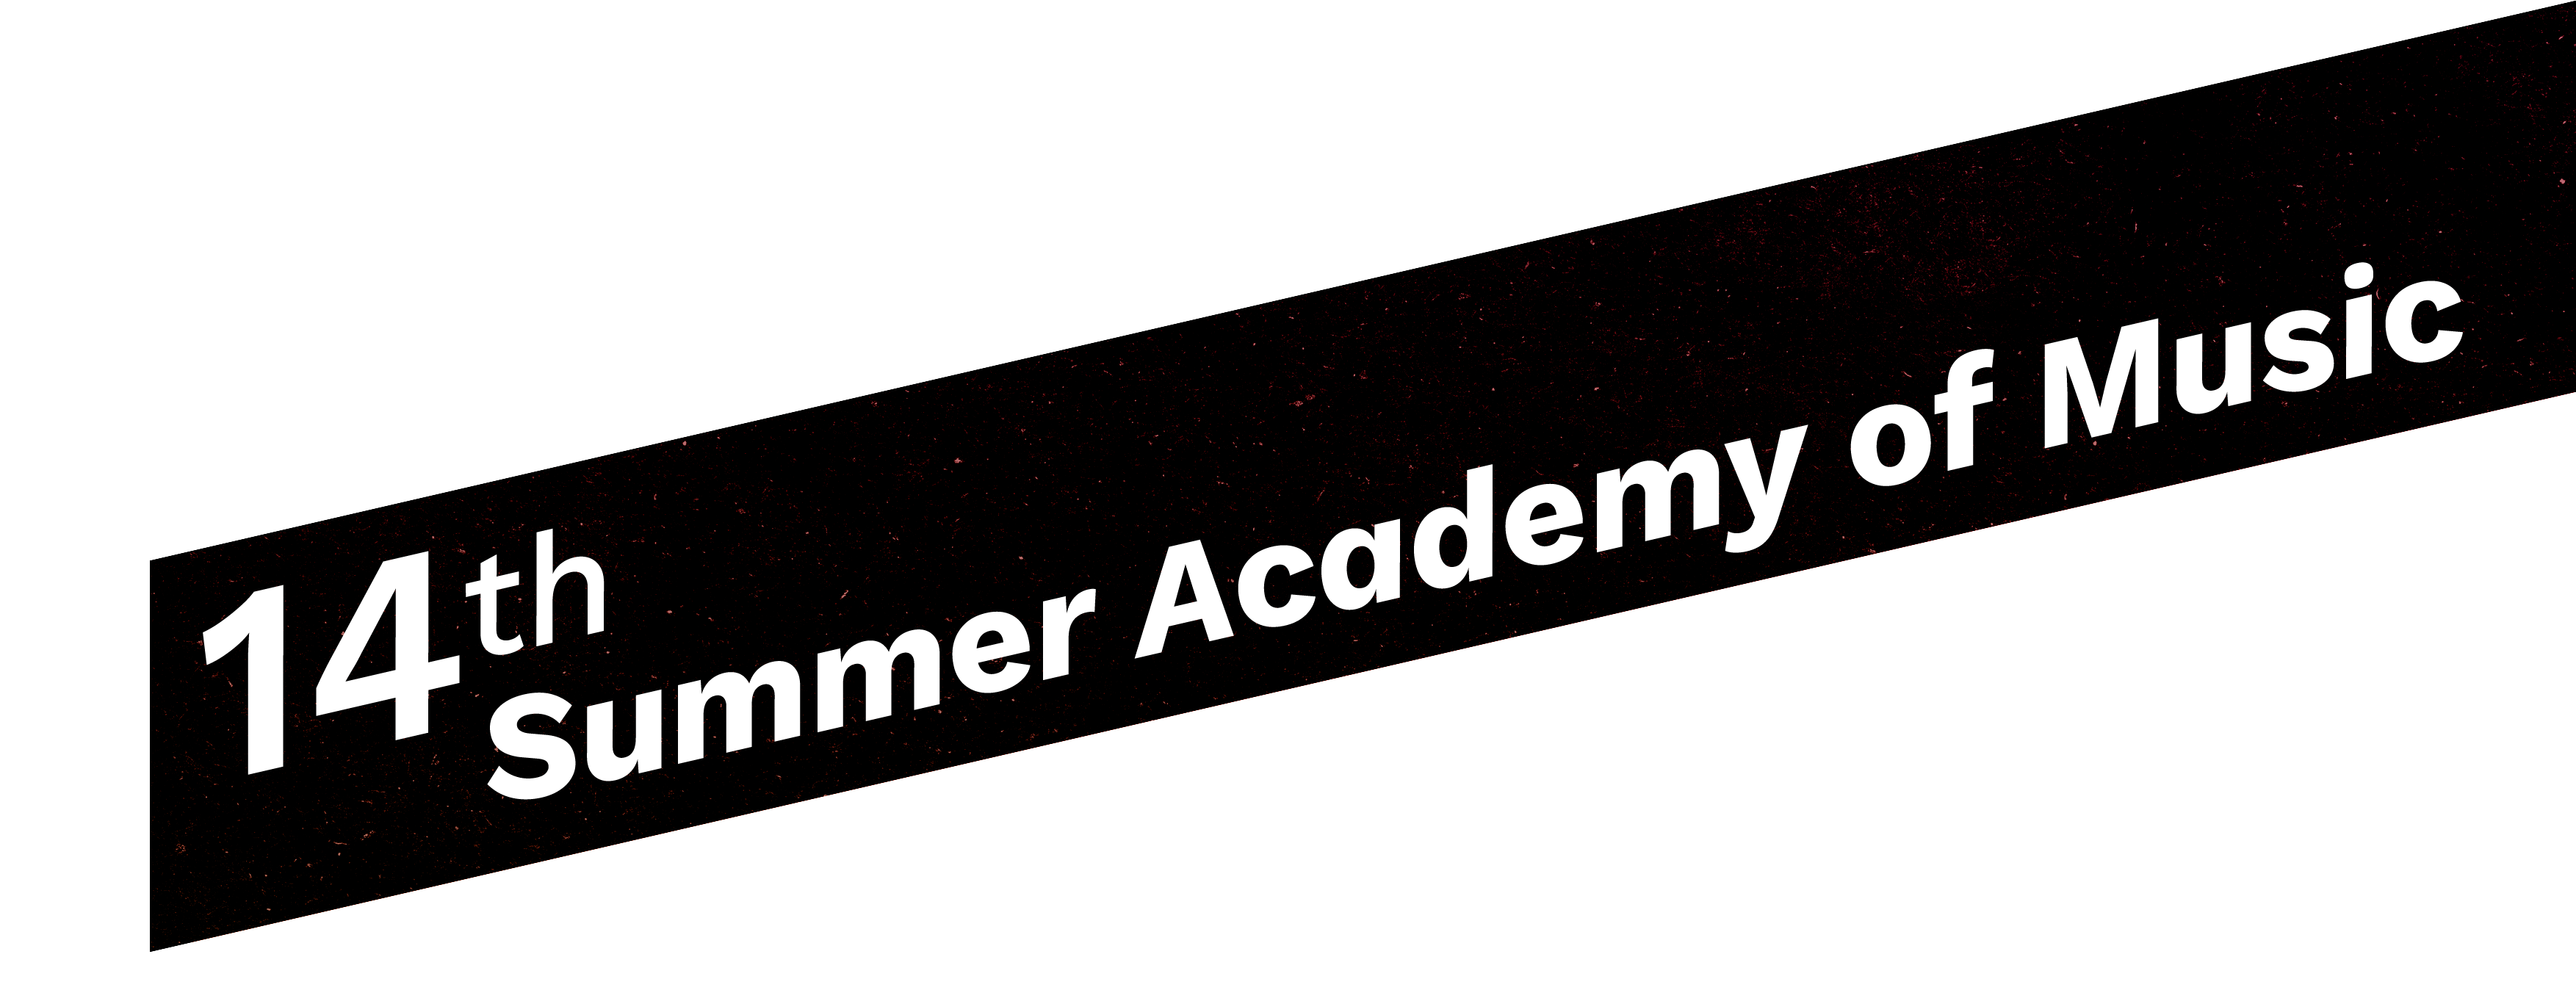 14th Summer Academy of Music